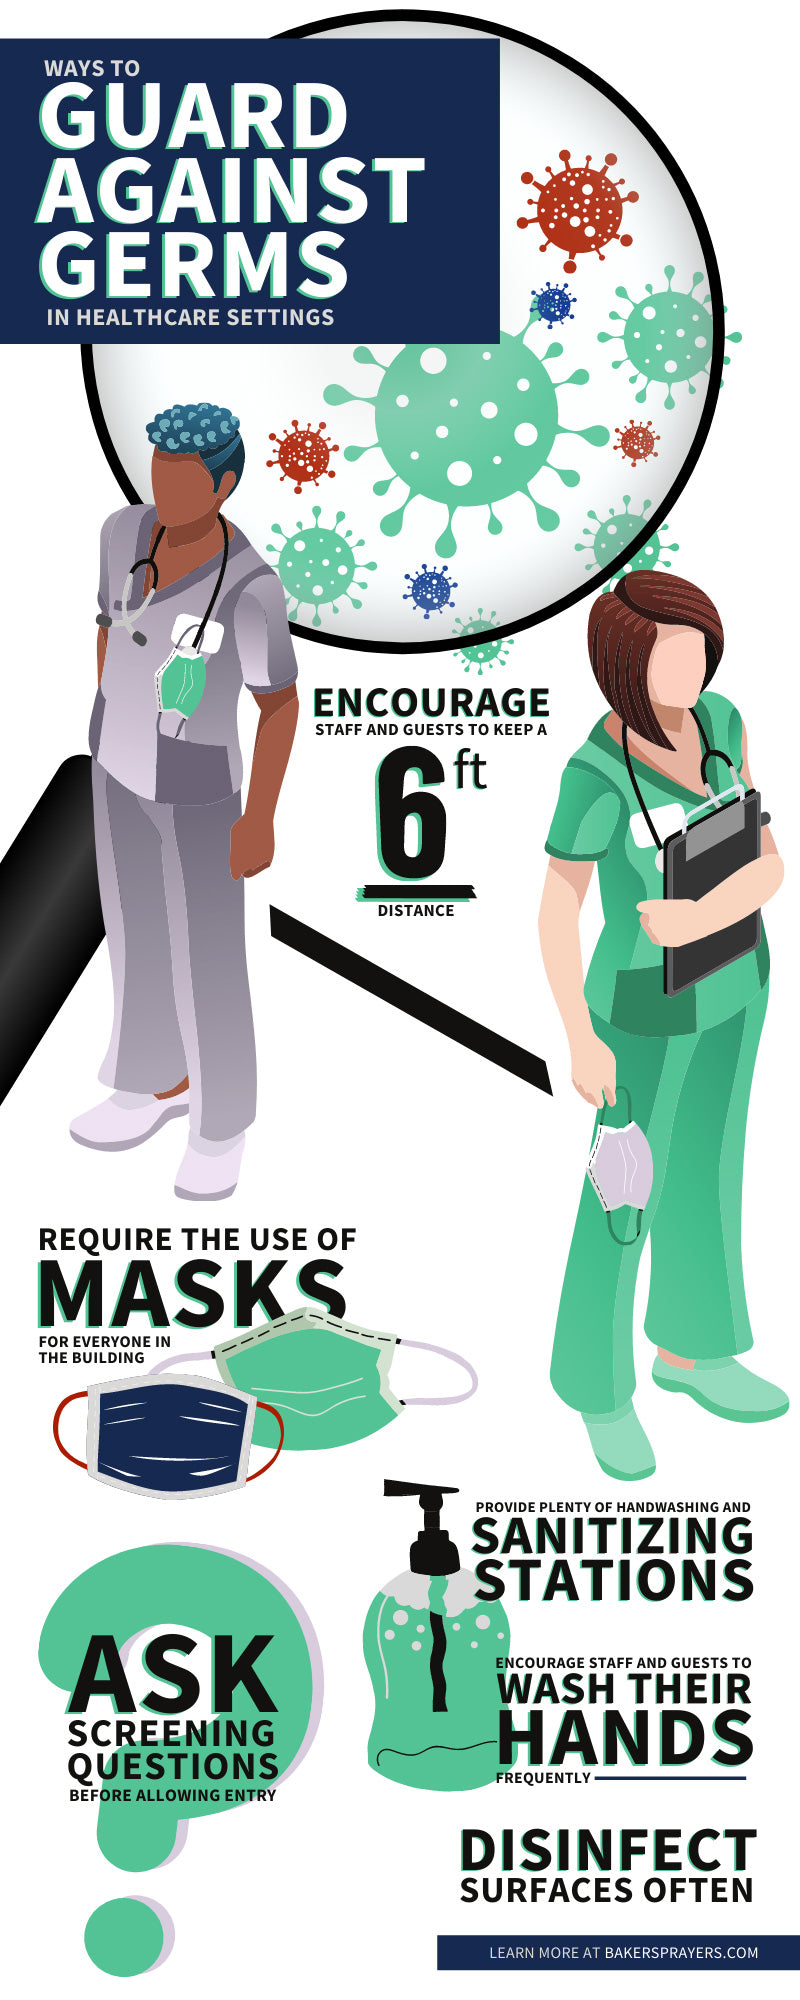 Ways To Guard Against Germs in Healthcare Settings infographic